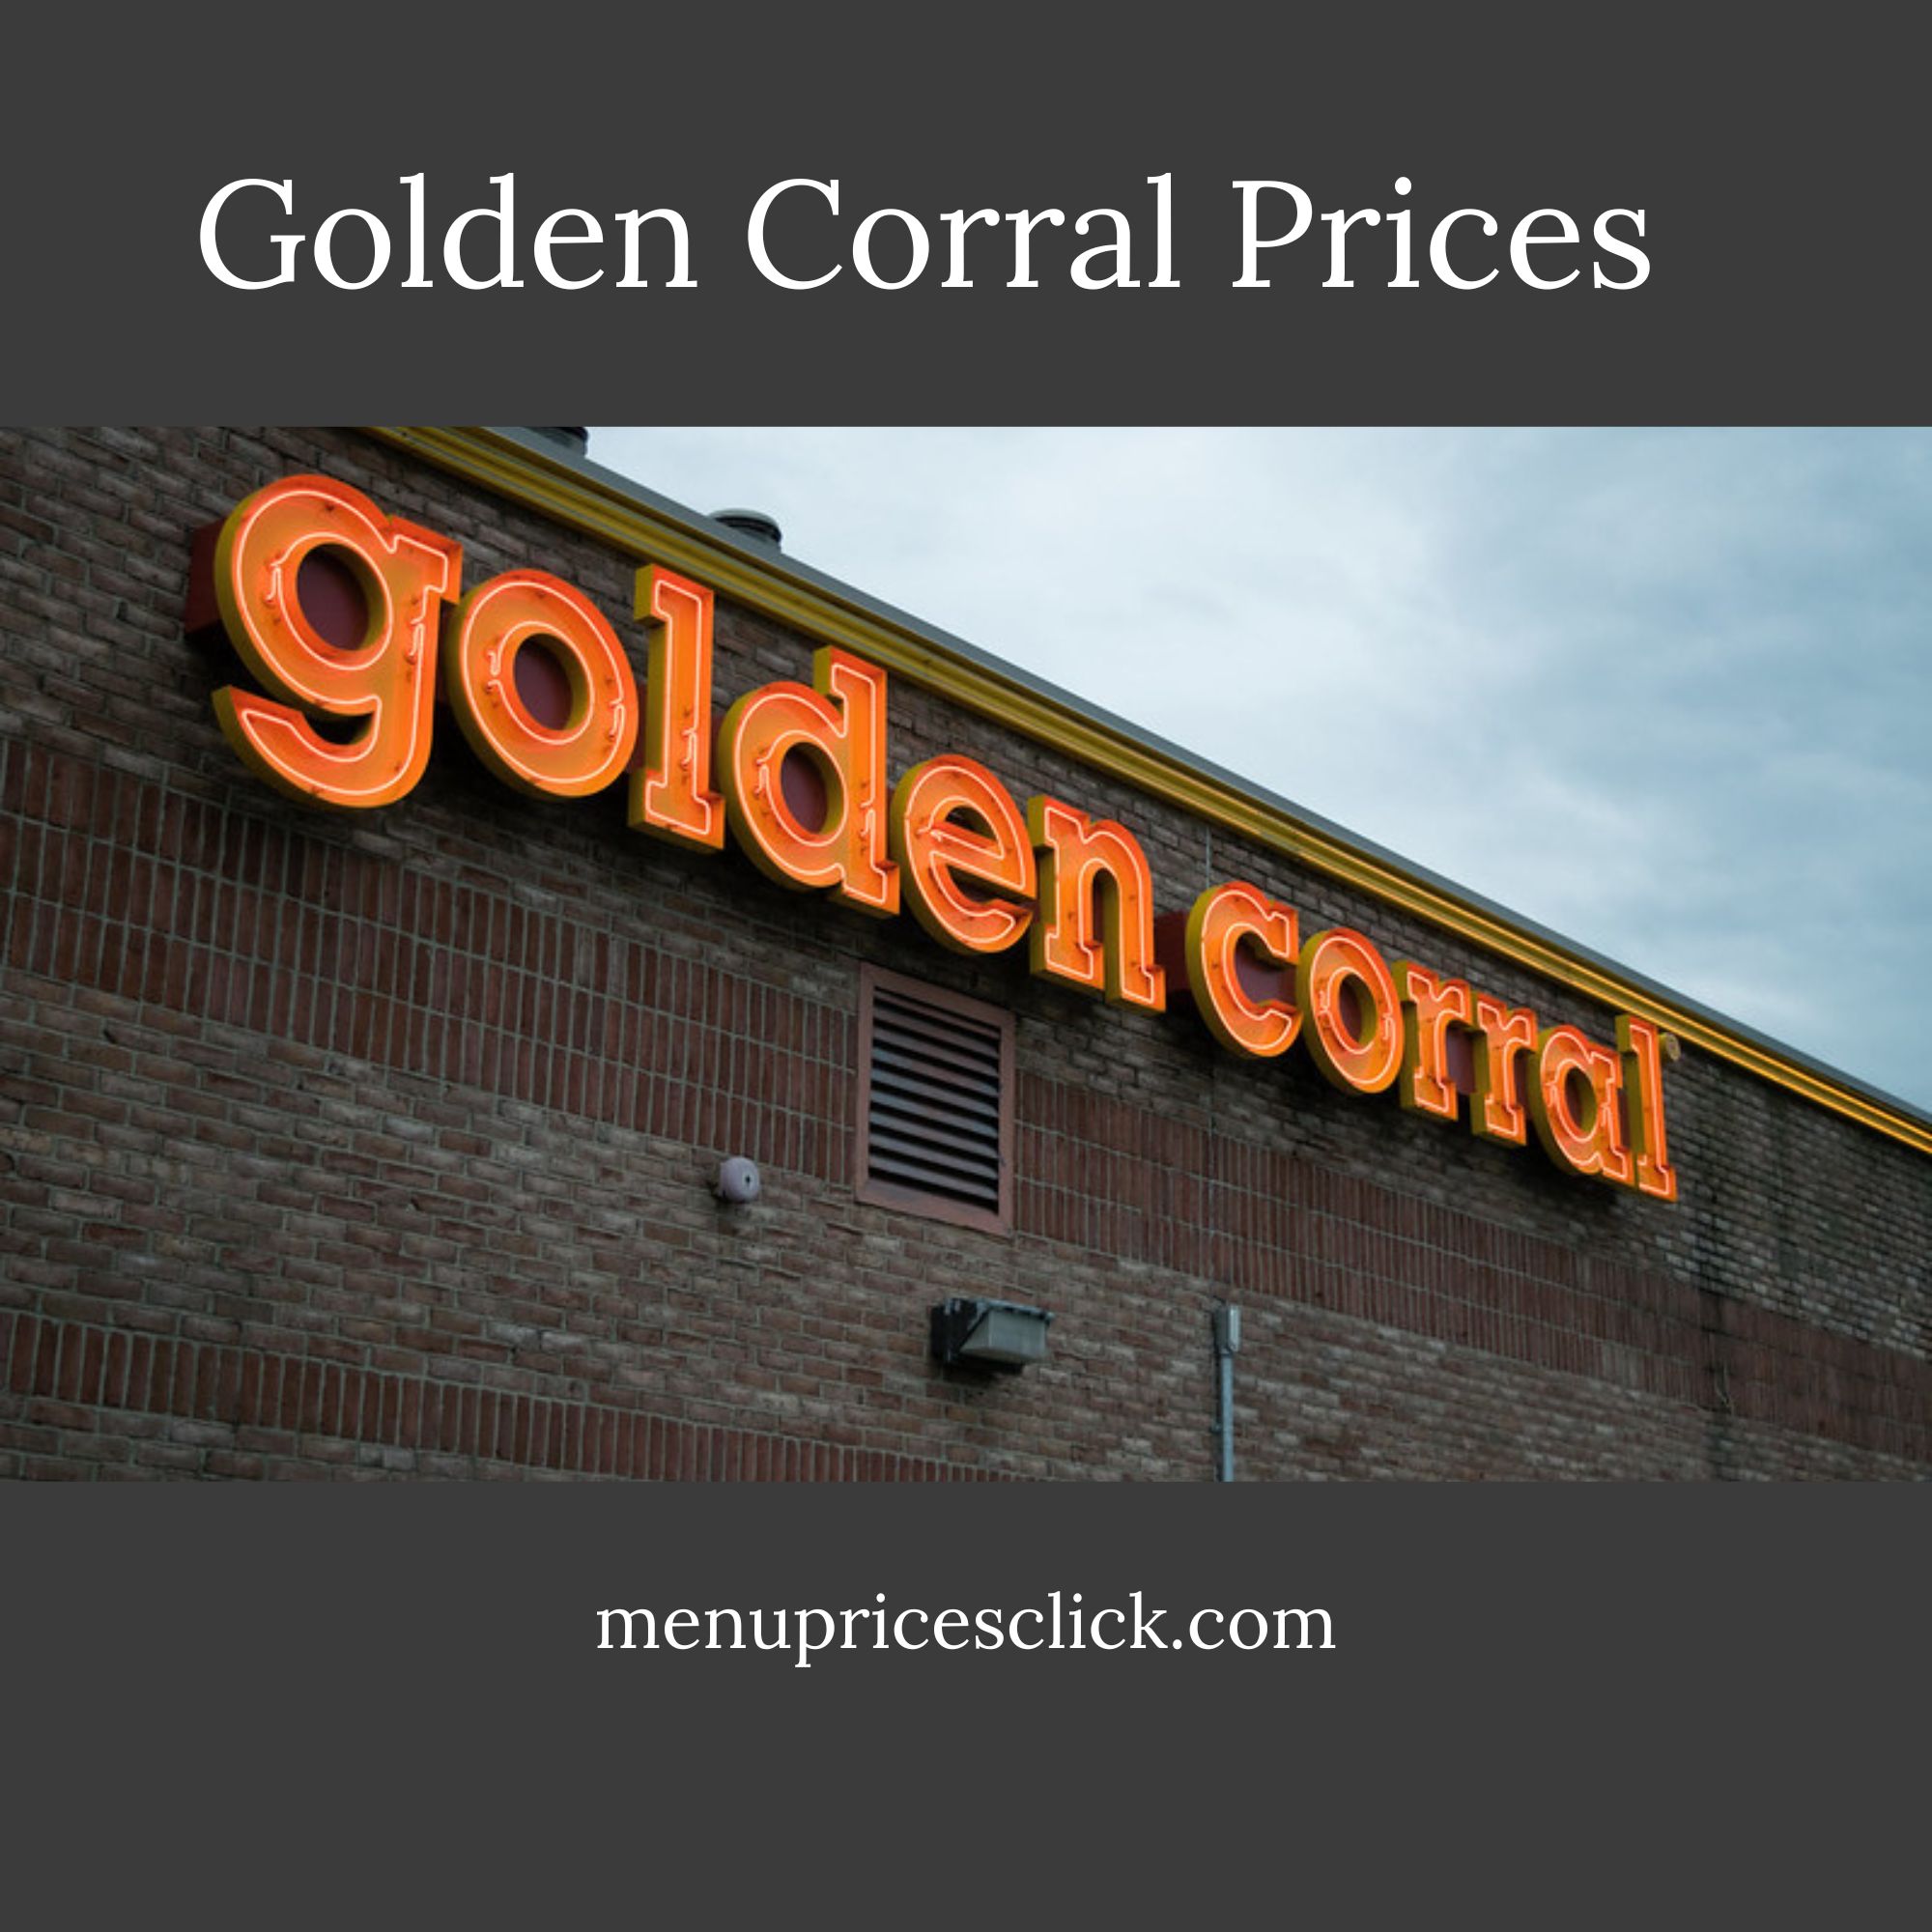 Golden Corral Prices Perfection - Quality And Savings